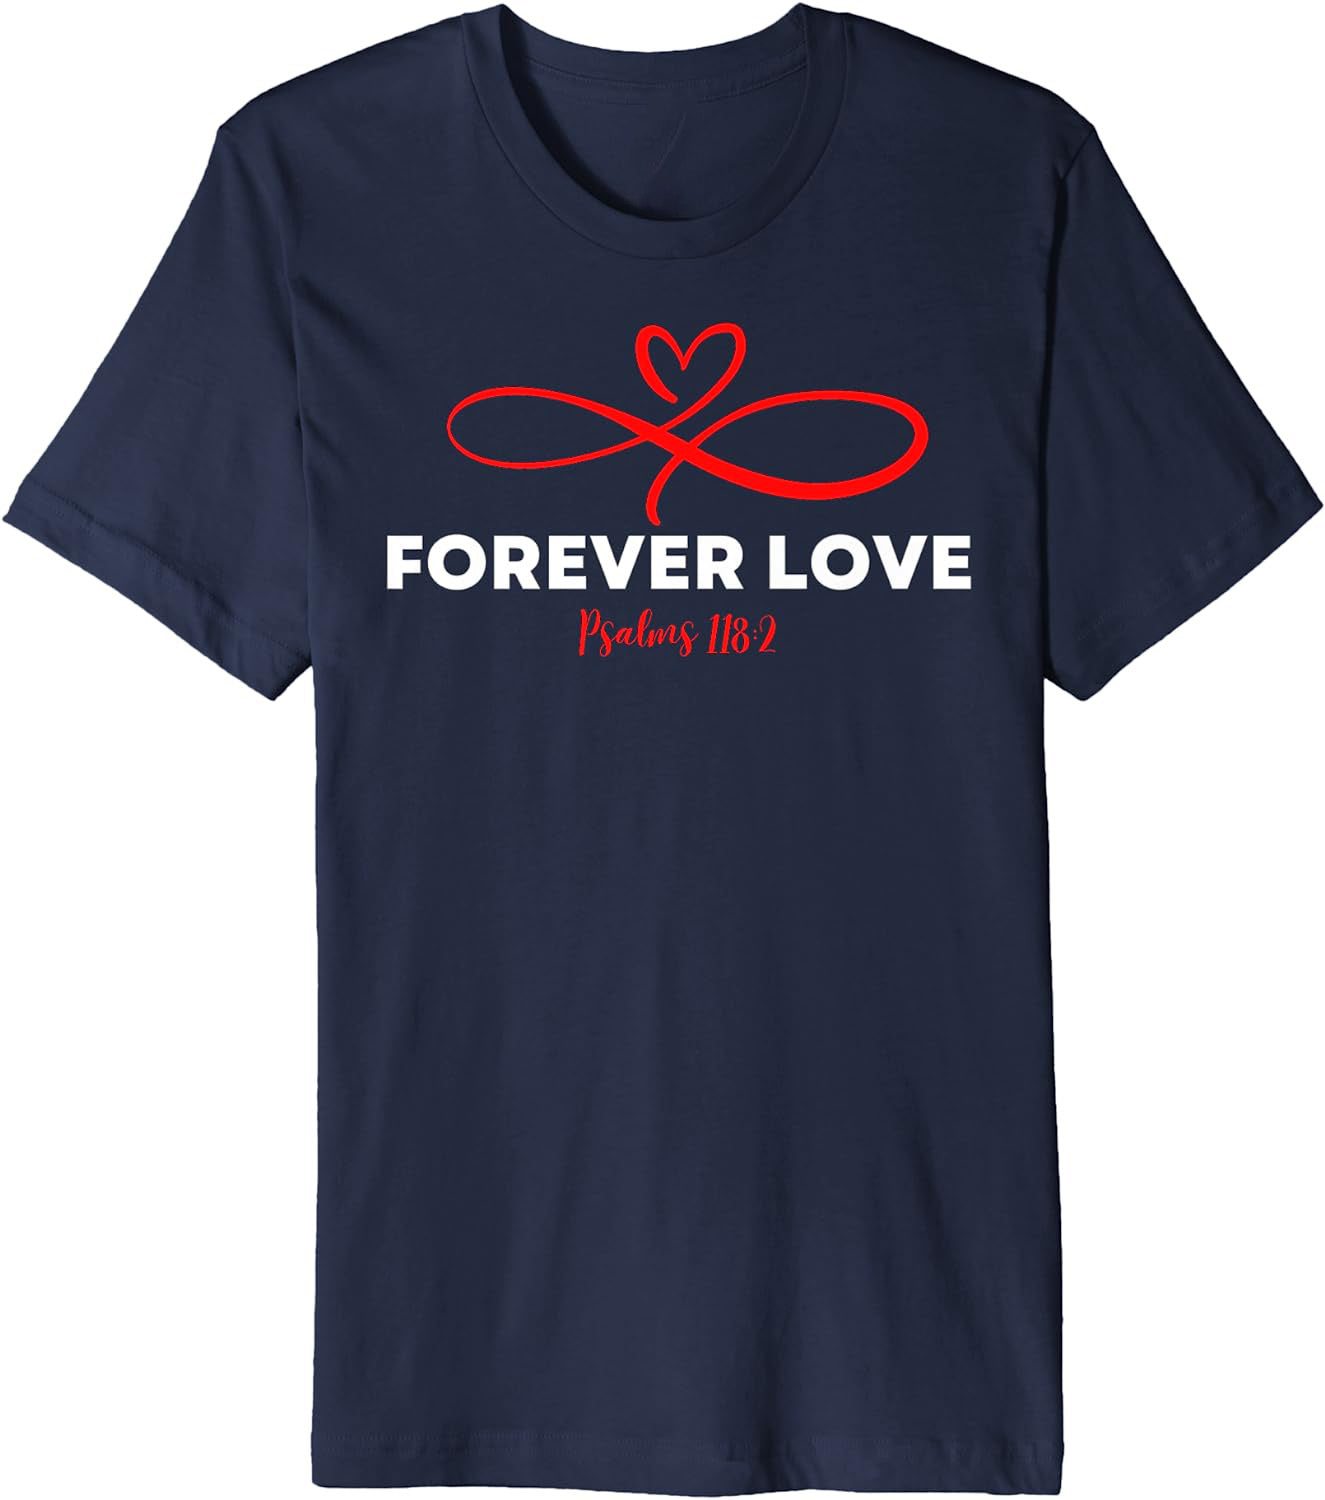 Forever Love - Premium T-Shirt - Fun and Inspirational Design by Crucial Key